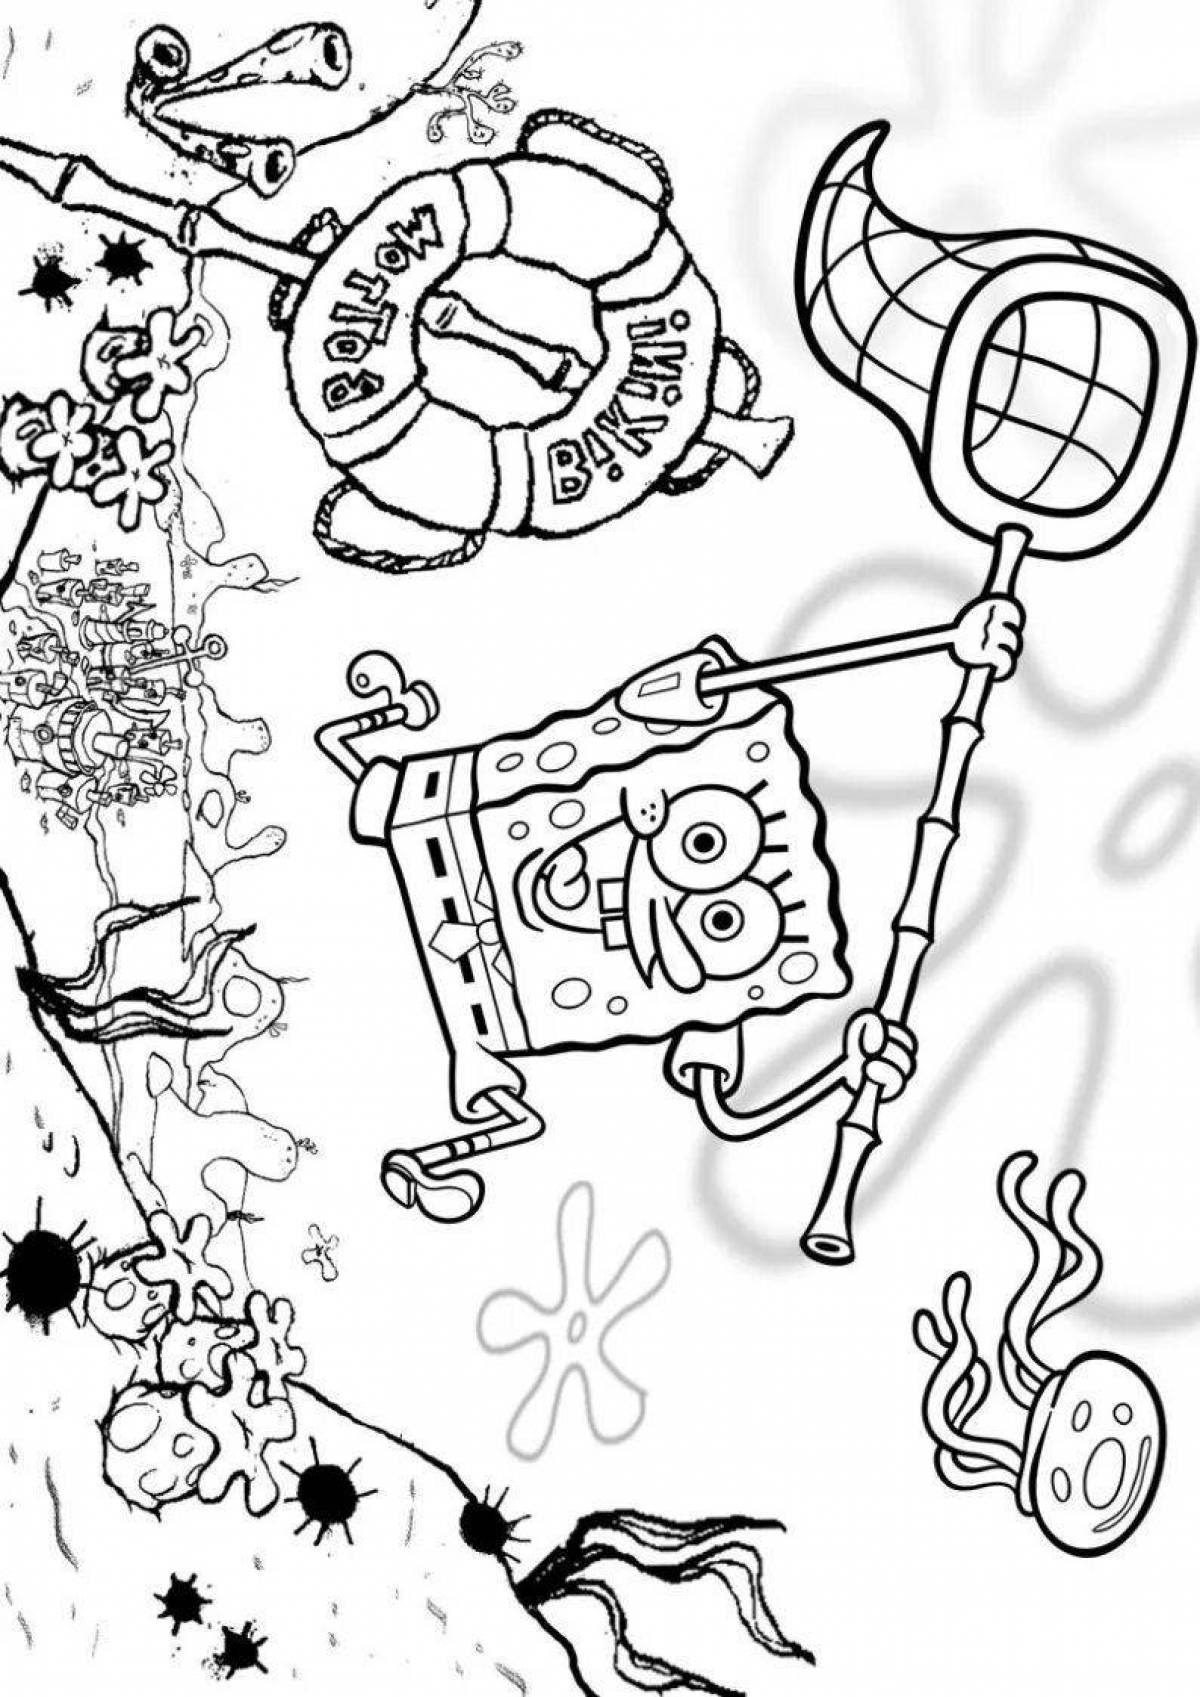 Exciting spongebob house coloring book